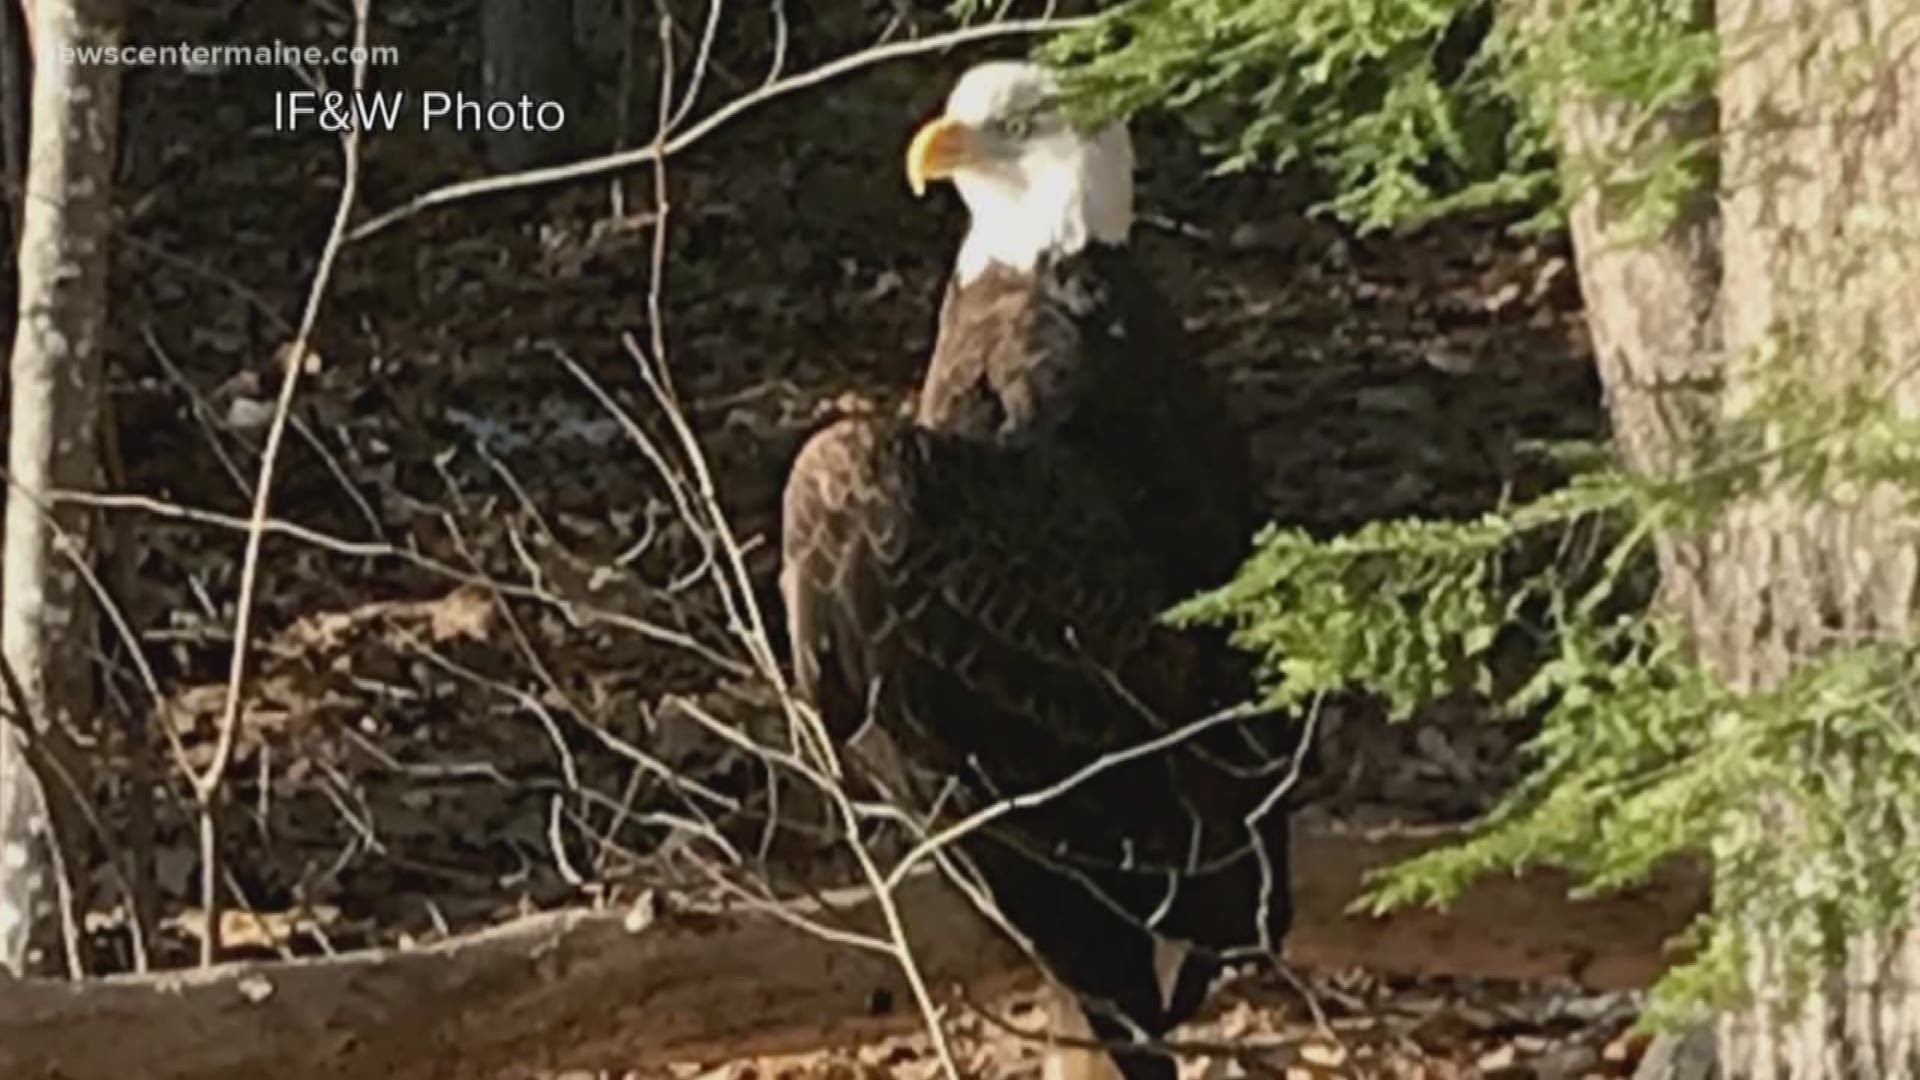 IF&W: Bald eagle found in Waterford that later died was shot